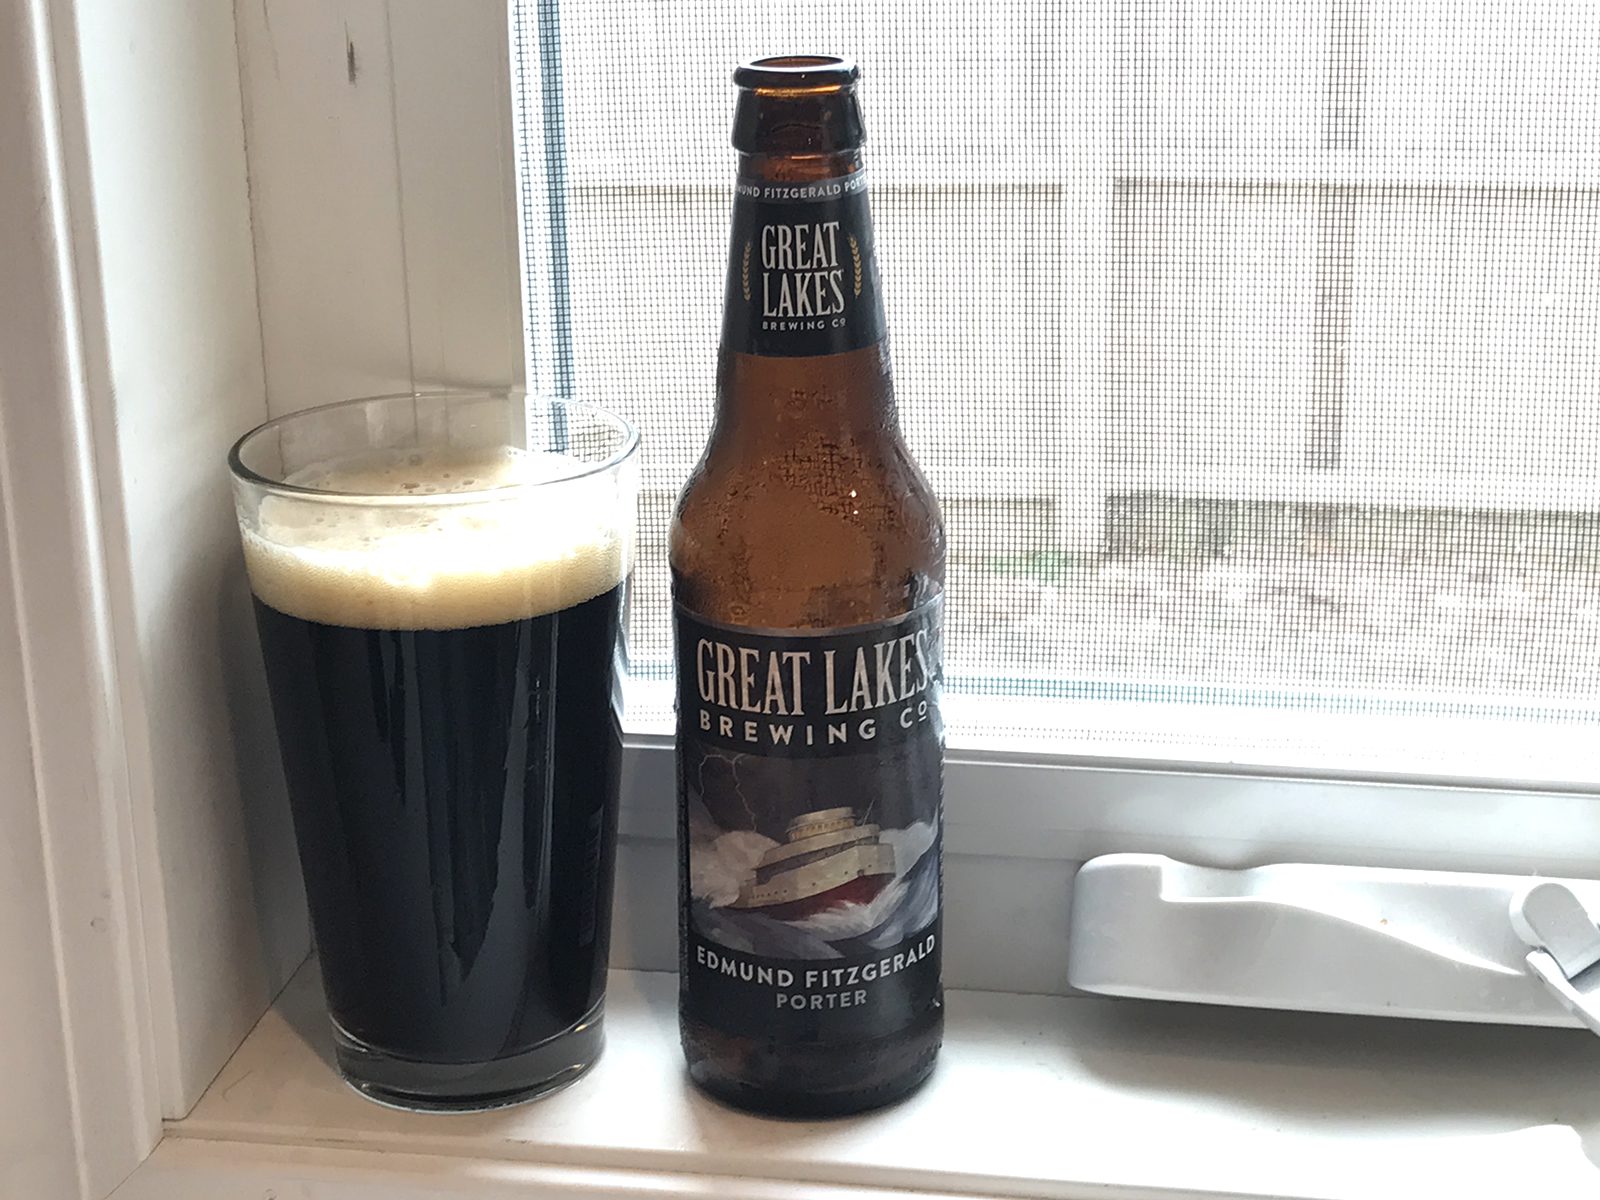 Great Lakes Brewing Company: Edmund Fitzgerald Porter